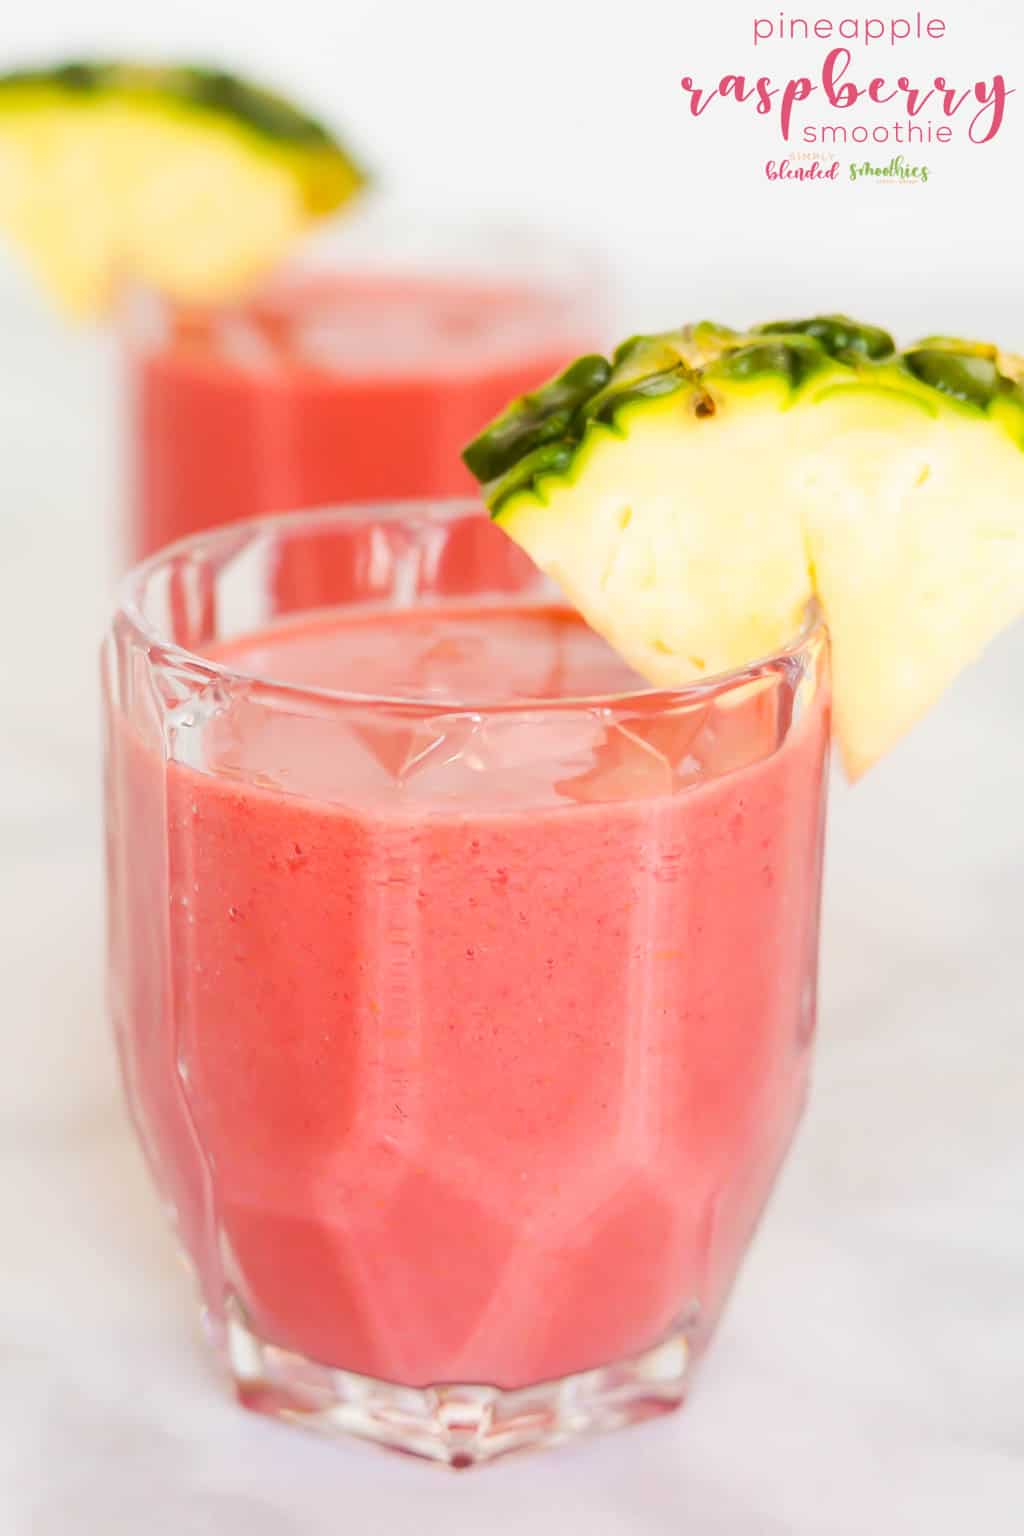 The Most Delicious Pineapple Raspberry Smoothie Recipe